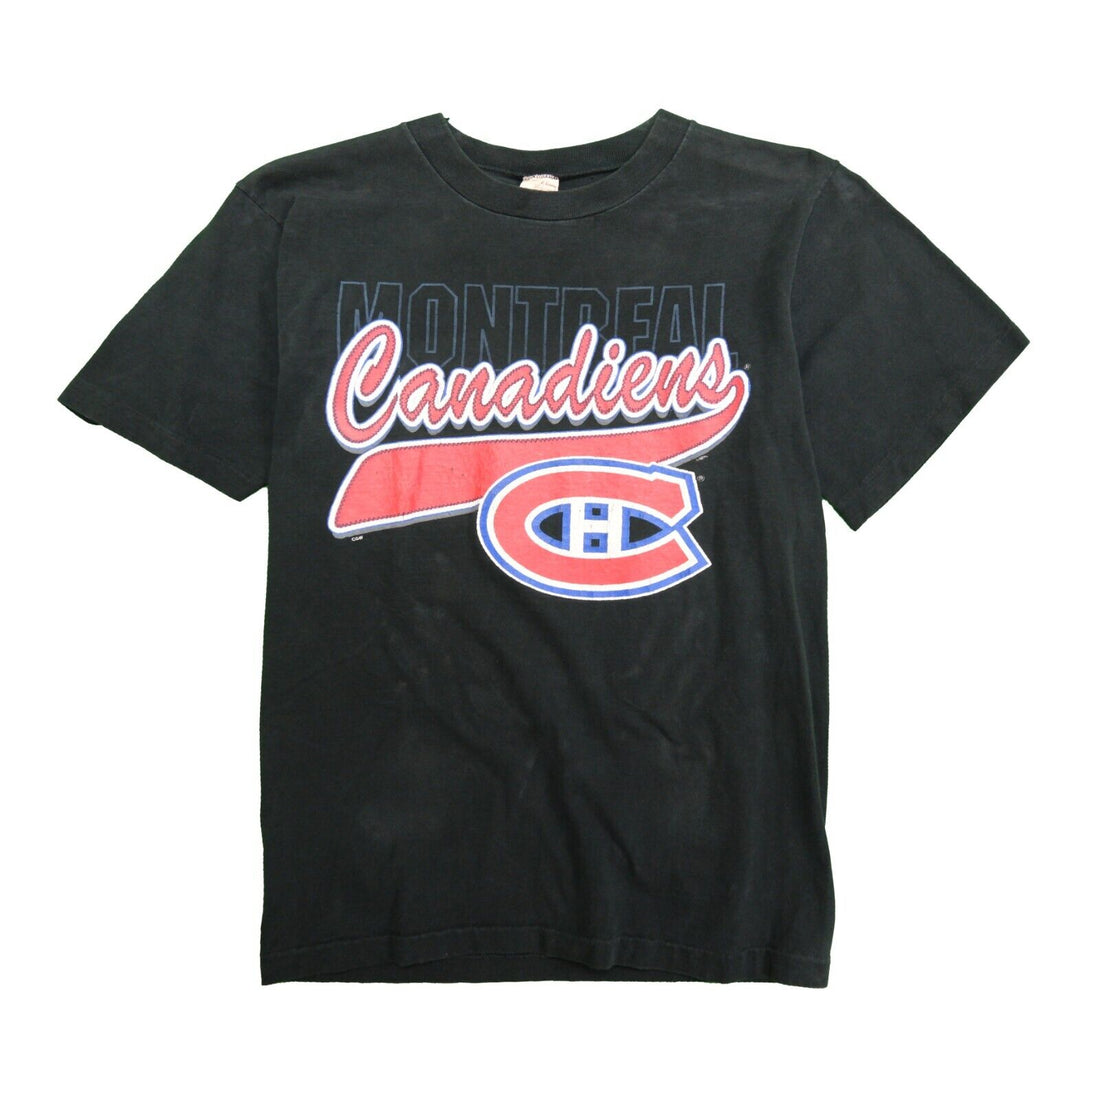 Vintage Montreal Canadiens T-Shirt Size Small Black 90s NHL Single Stitch